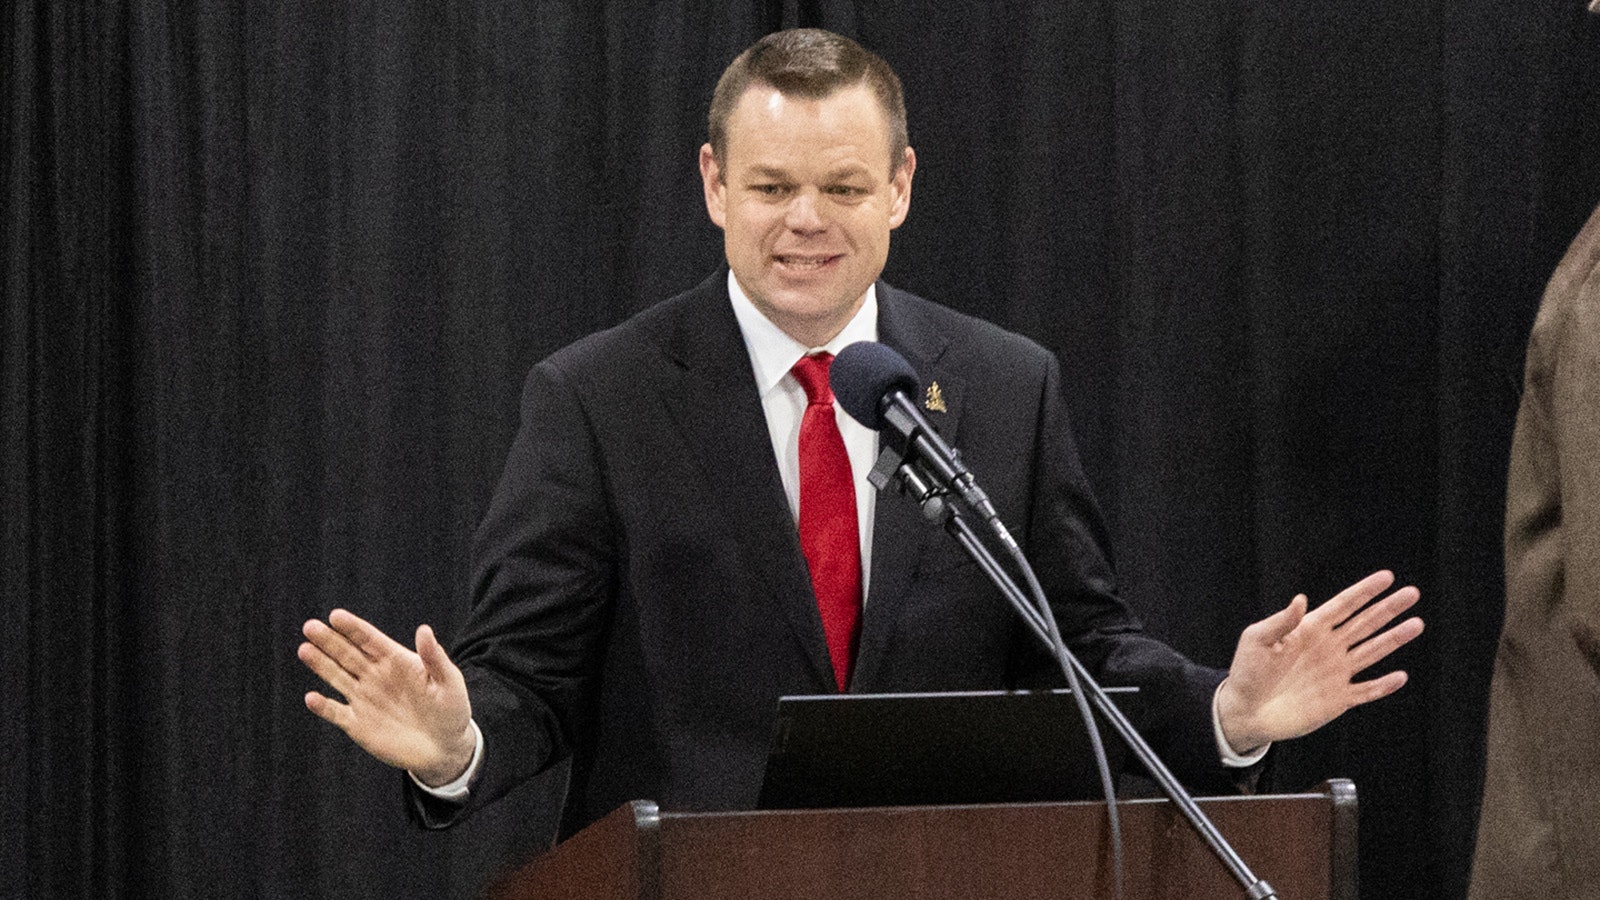 Republican candidate for Wyoming's U.S. Senate nomination, speaks during the 2024 Wyoming Republican Party convention in Cheyenne.